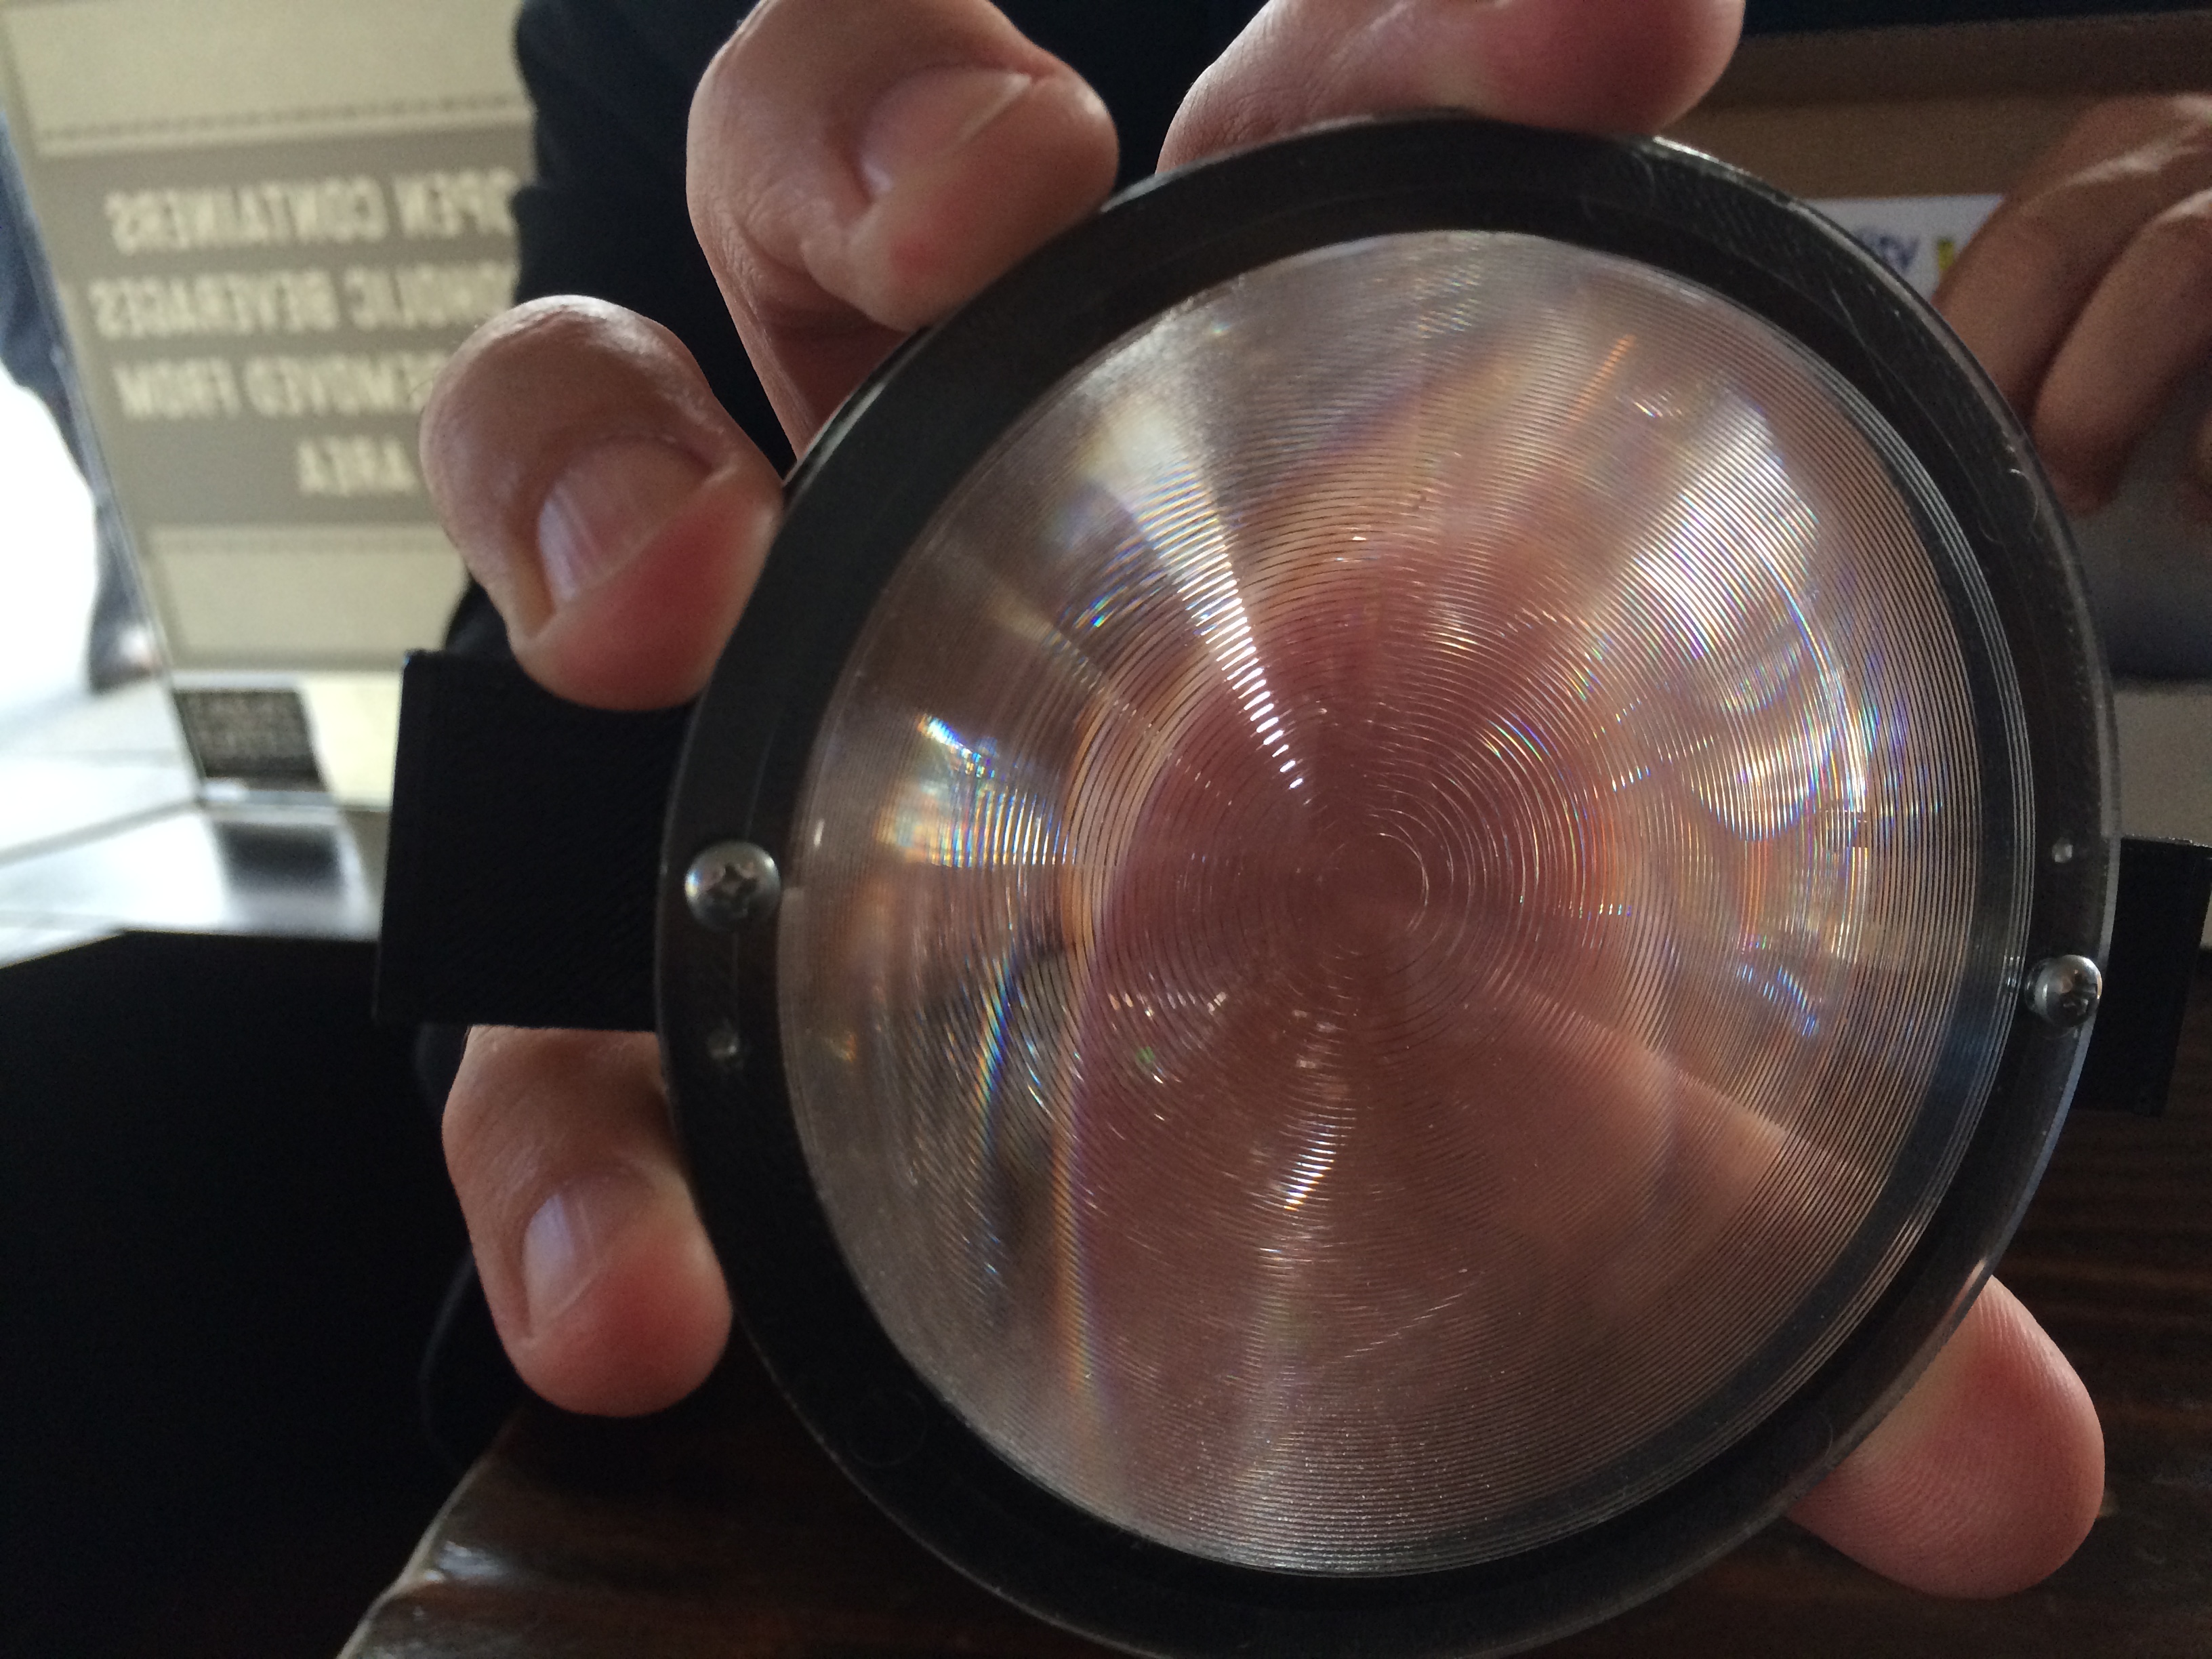 Another view of the 180-degree lens 